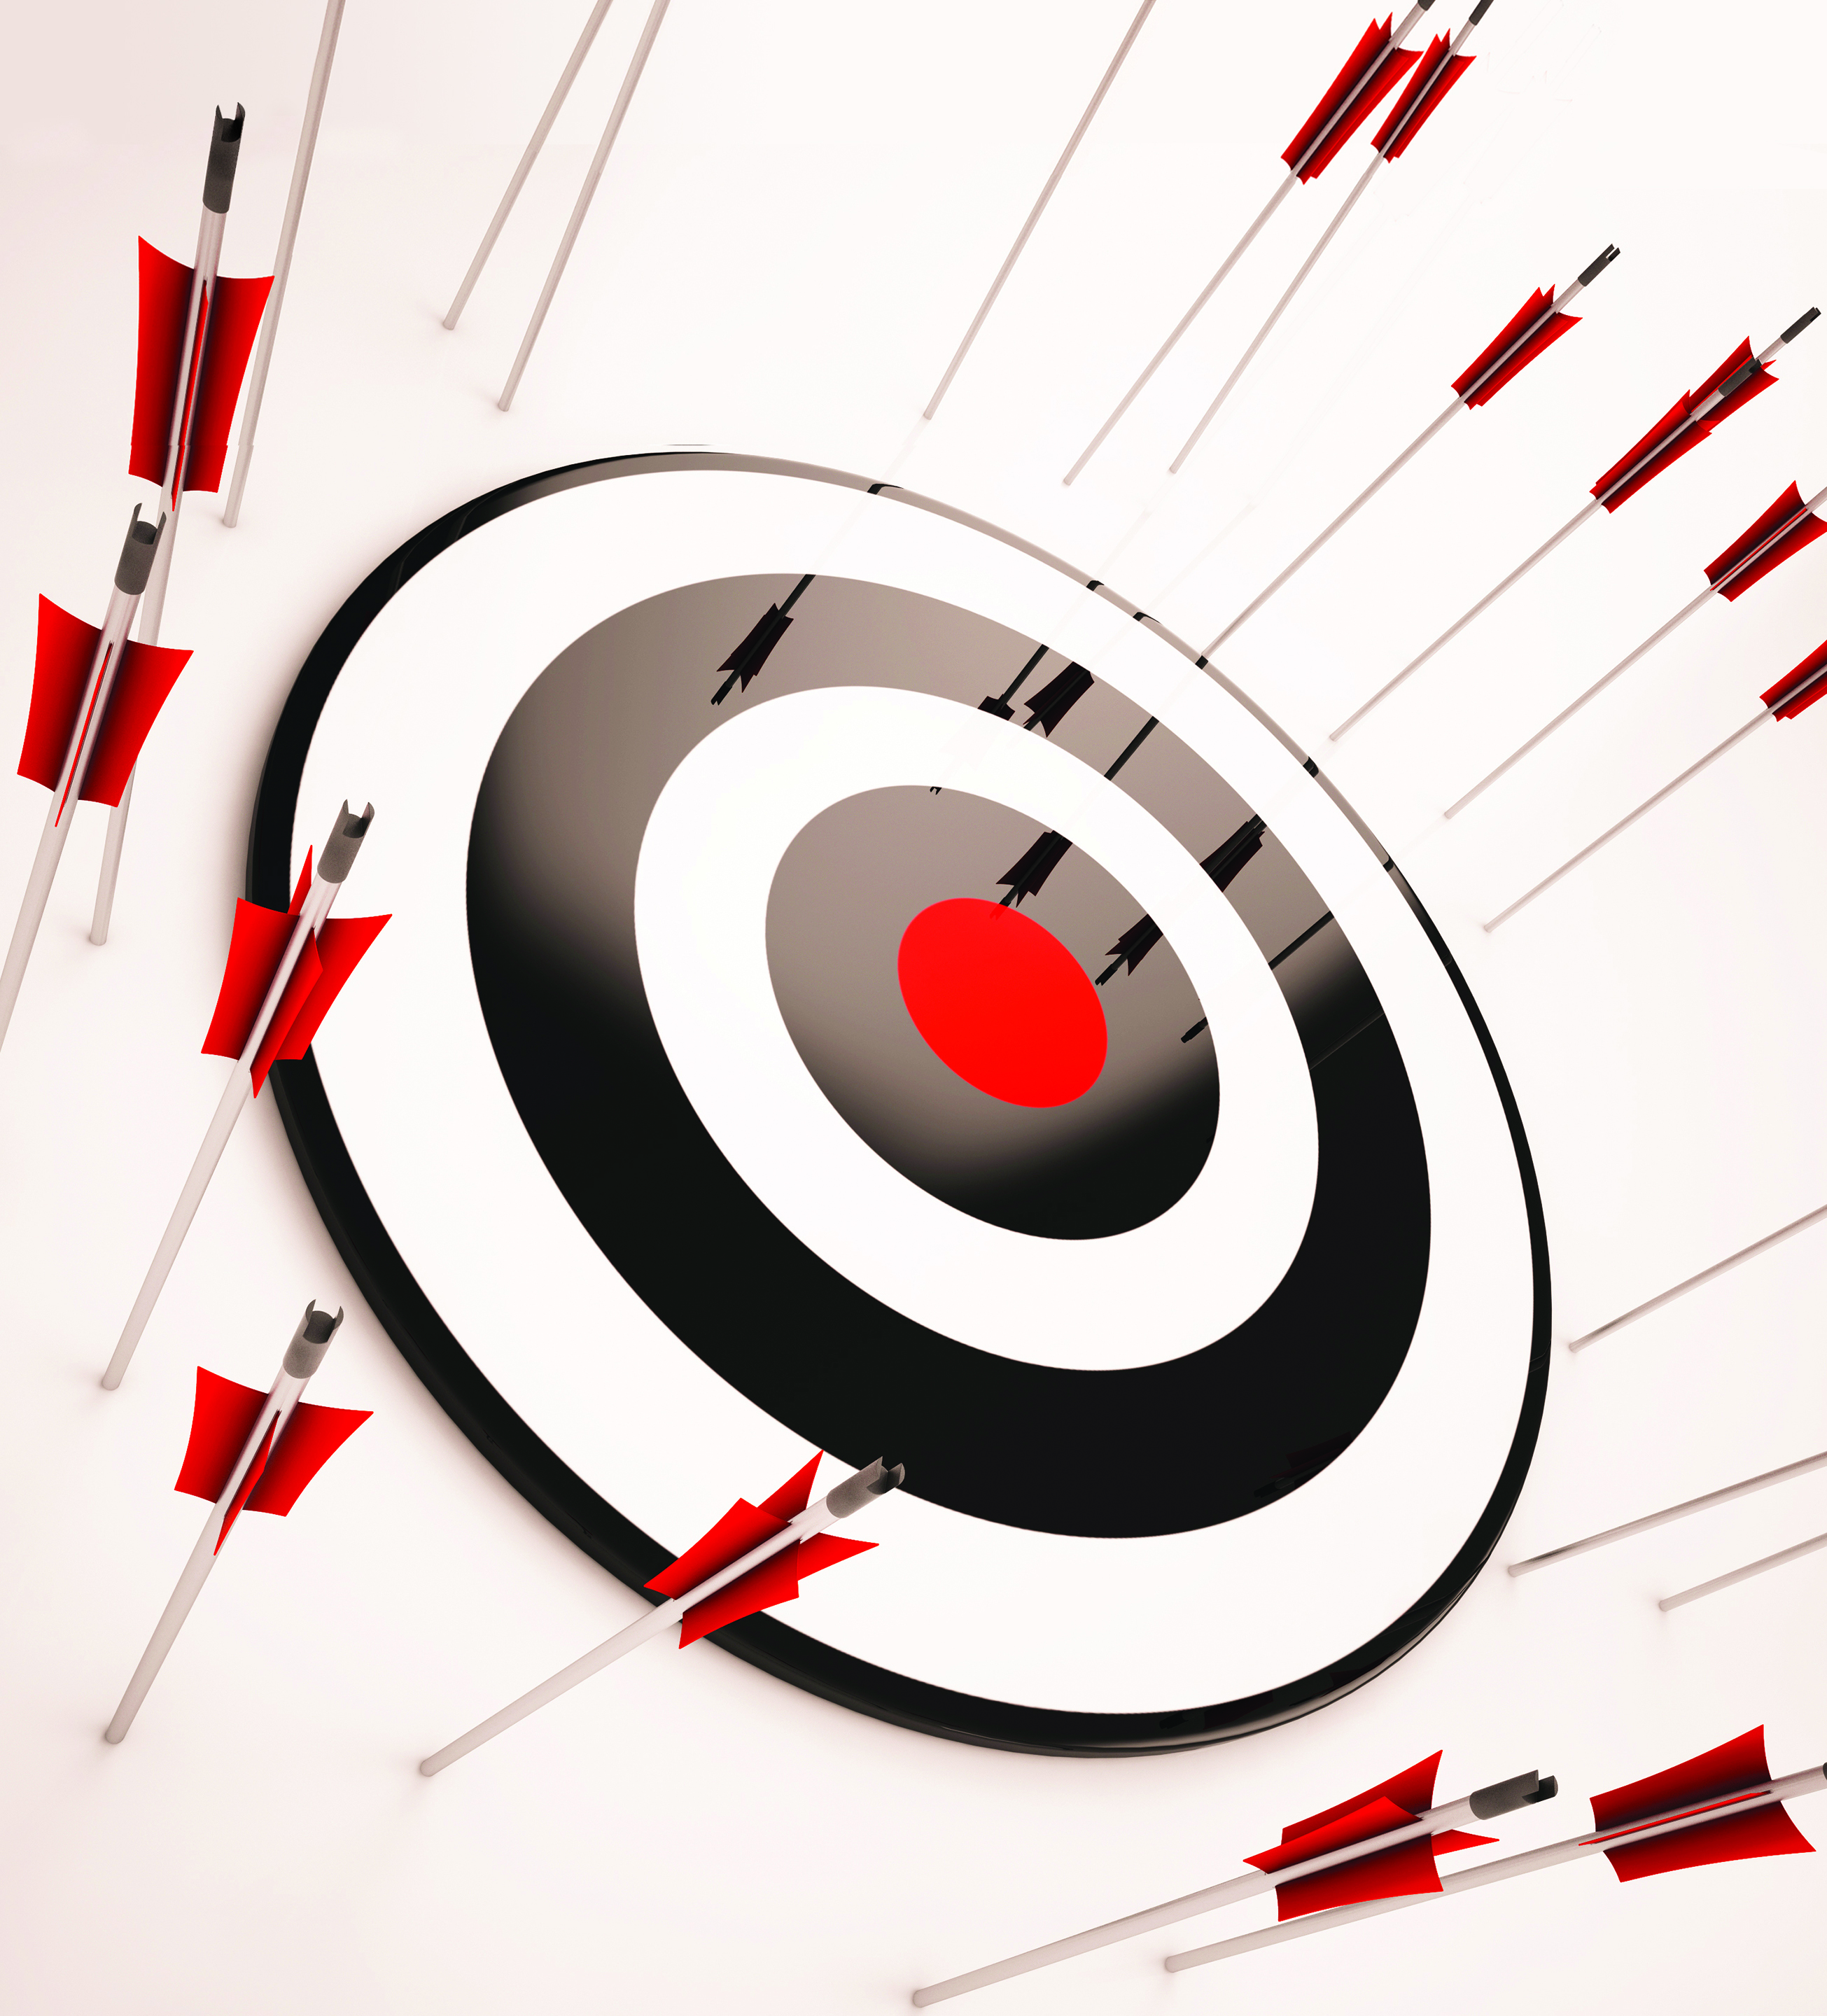 Off Target Showing Aiming Mistake Lacking Confidence